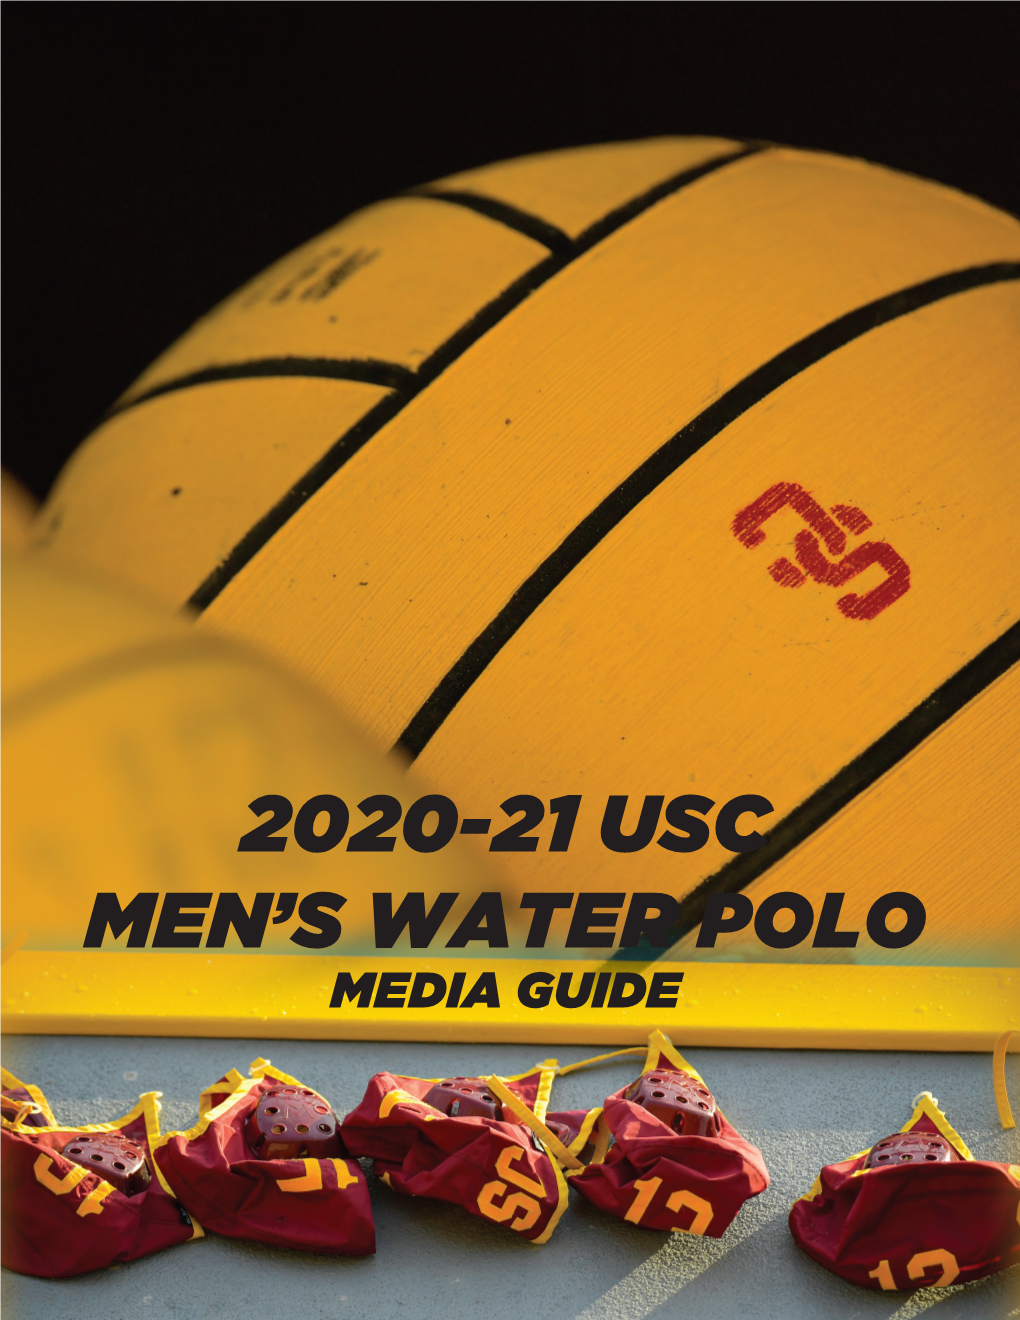 2020-21 Usc Men’S Water Polo Media Guide 2020-21 Roster No